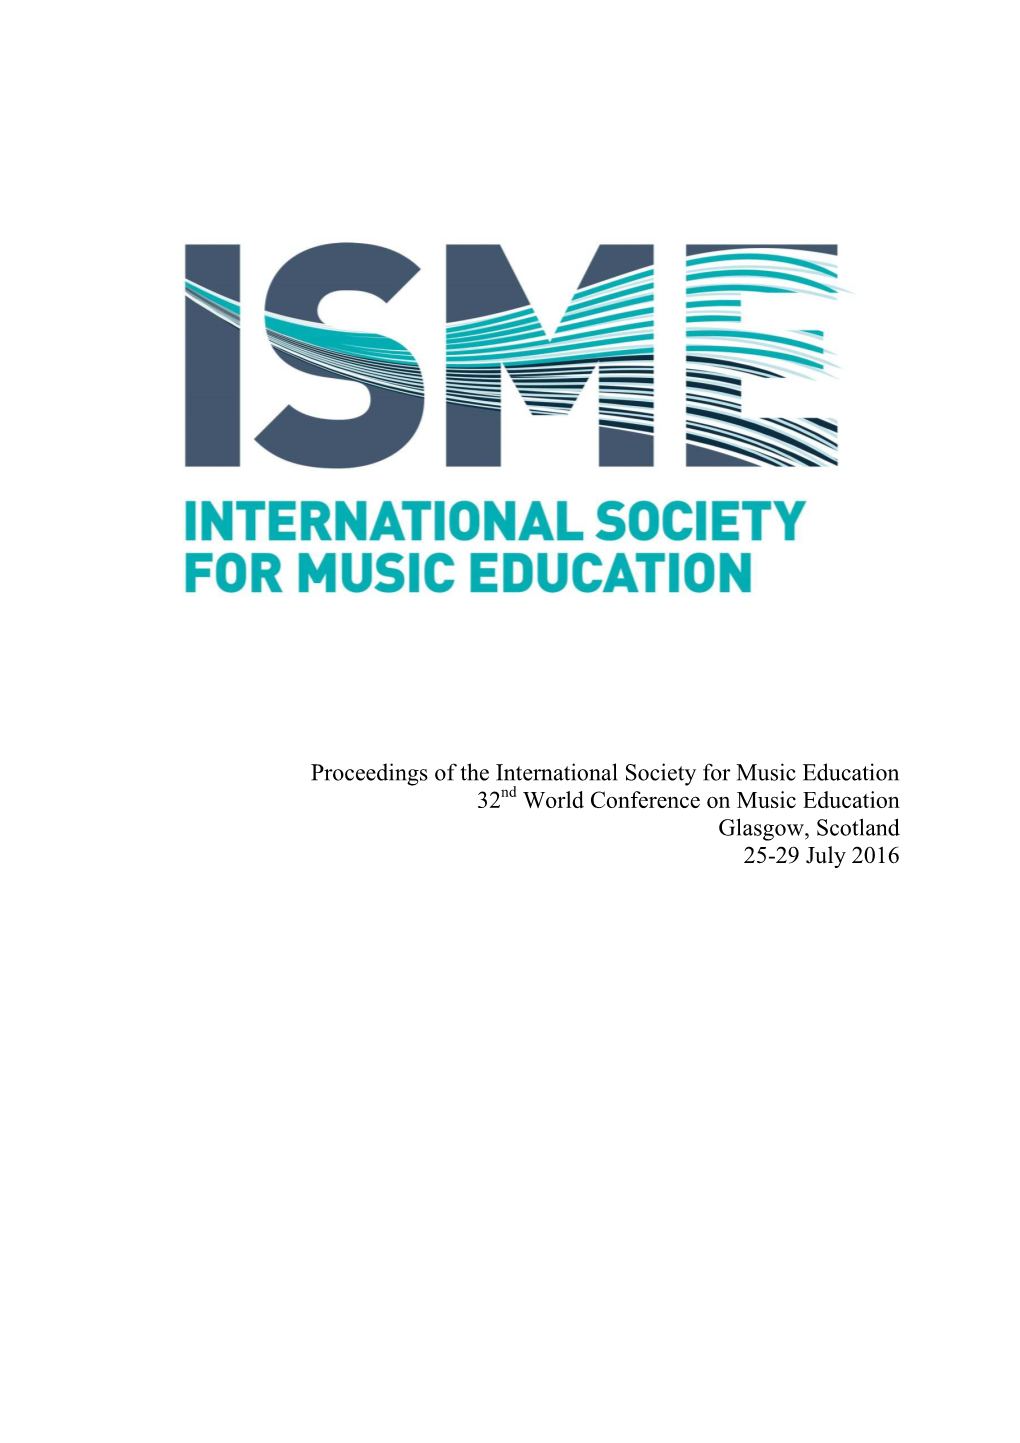 ISME Conference Proceedings 2016 Final